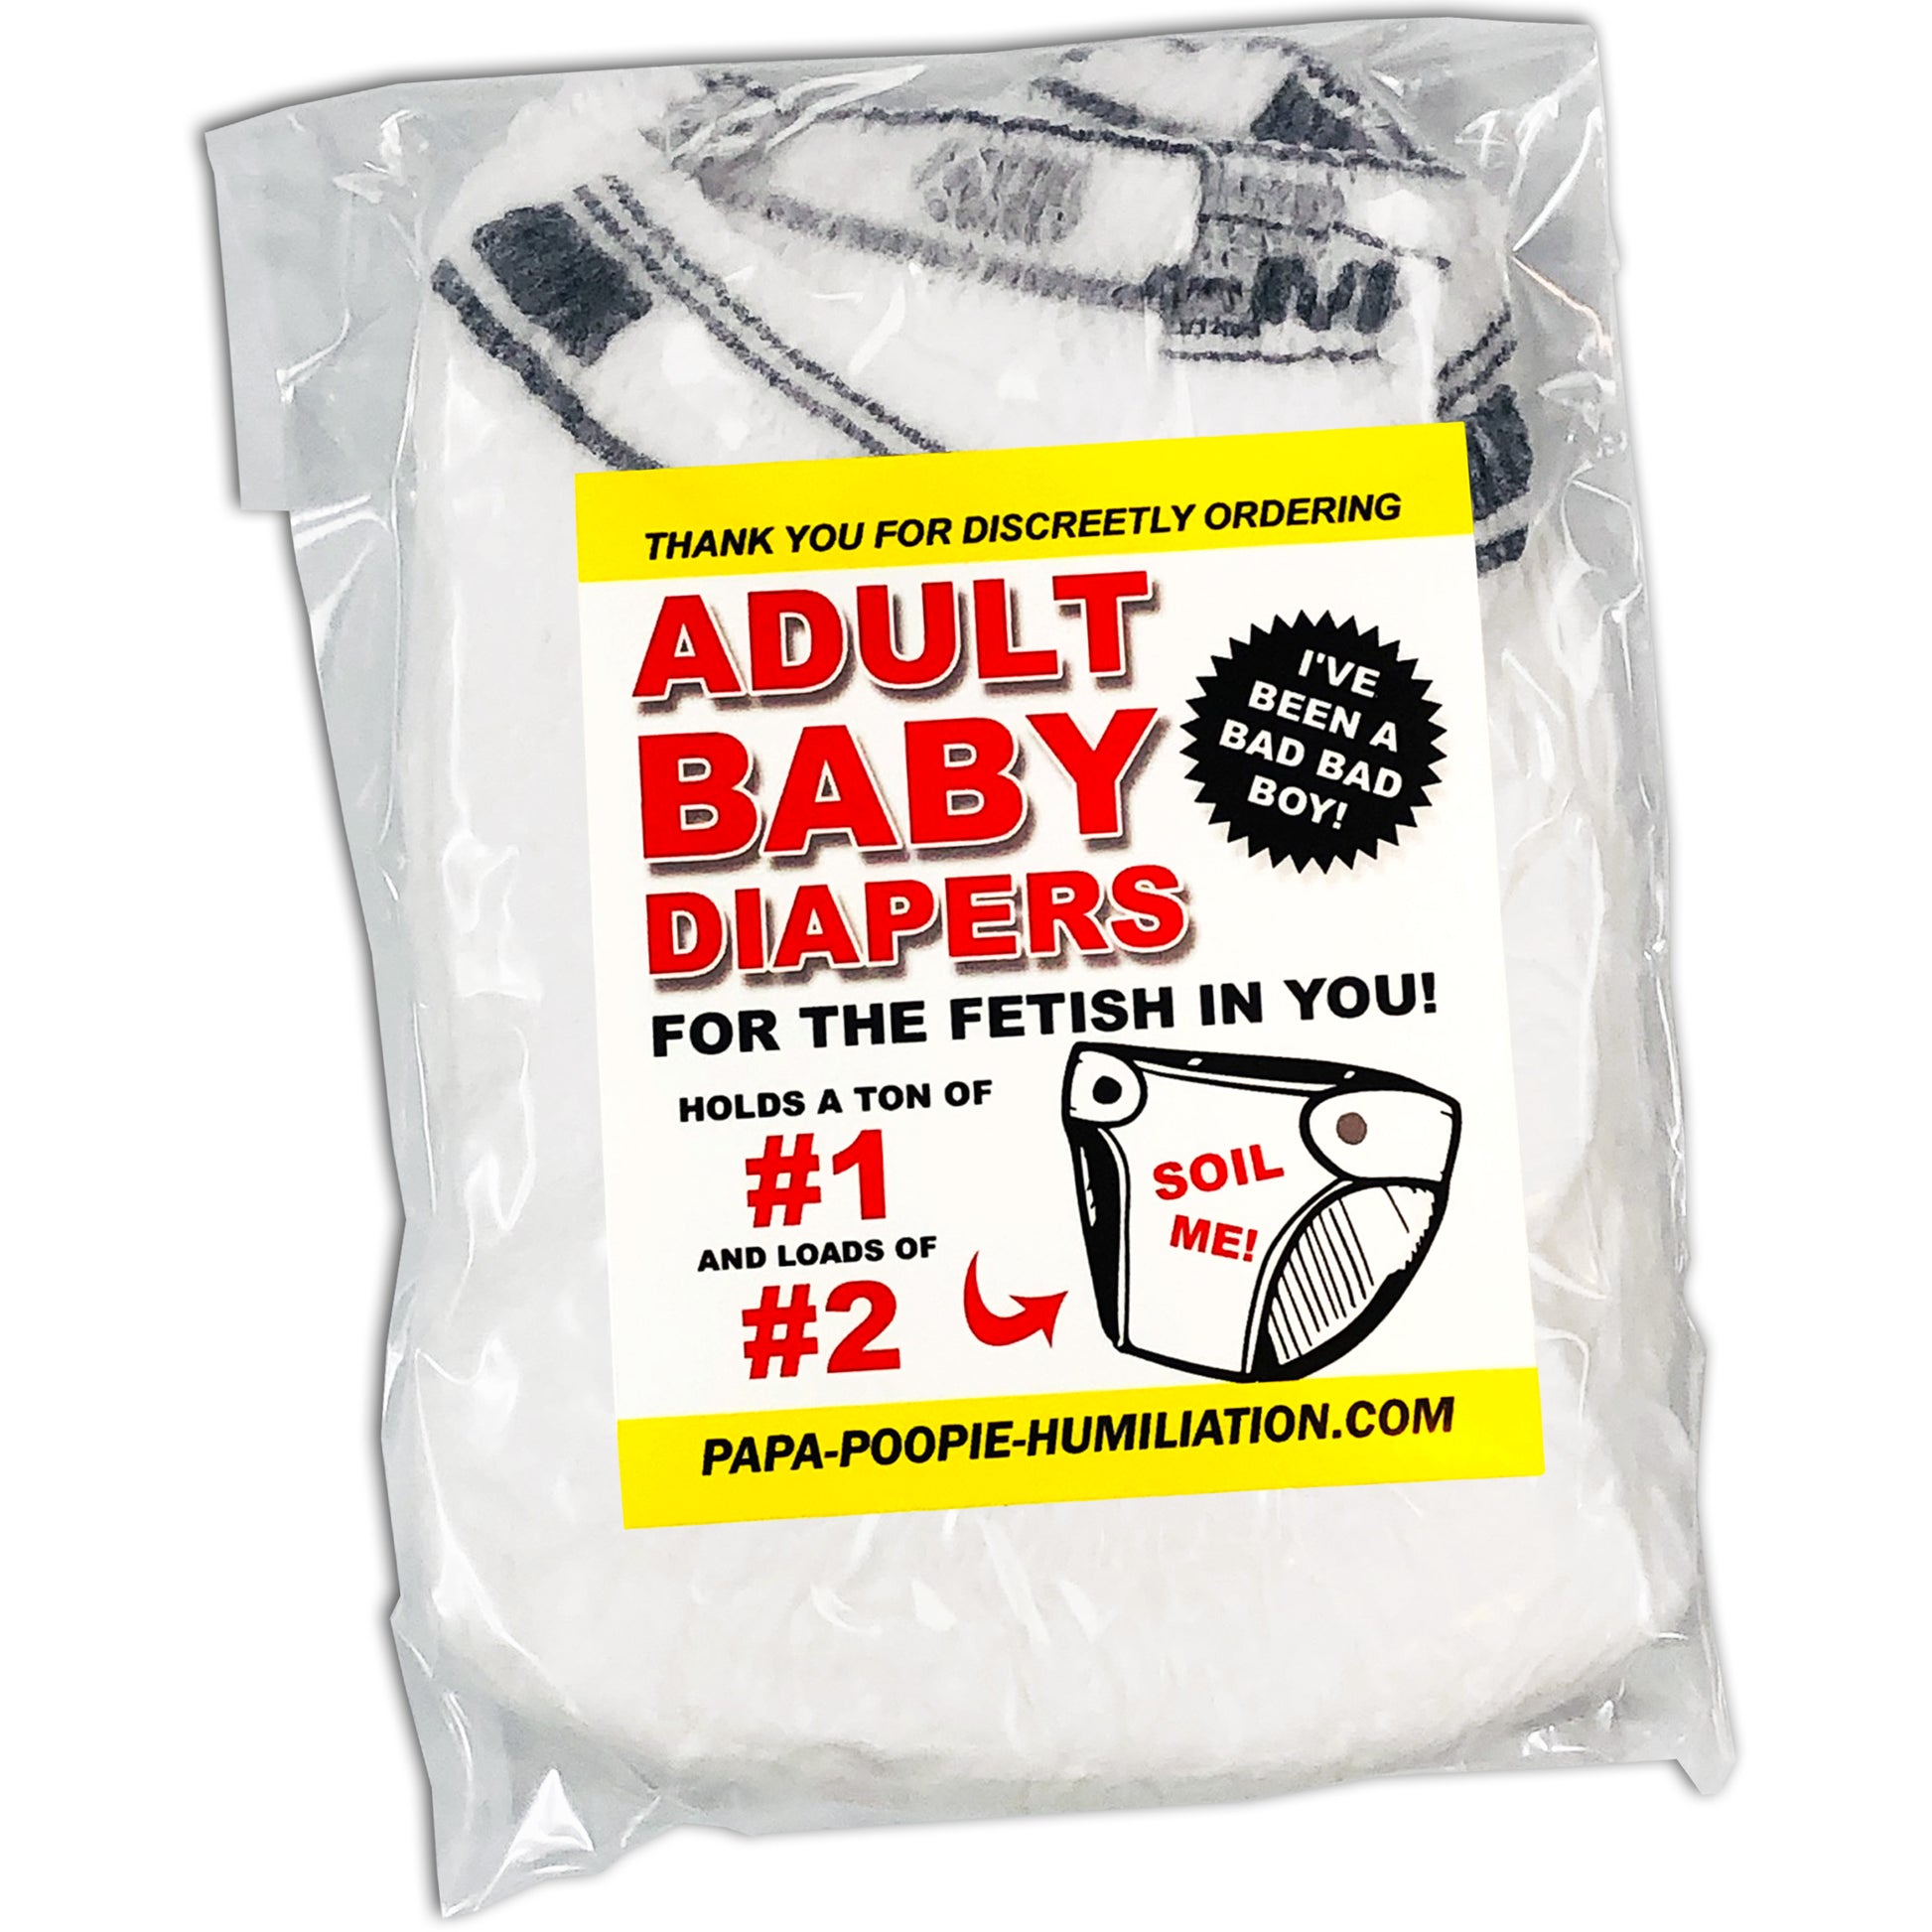 Adult Baby Diapers clear prank mailer